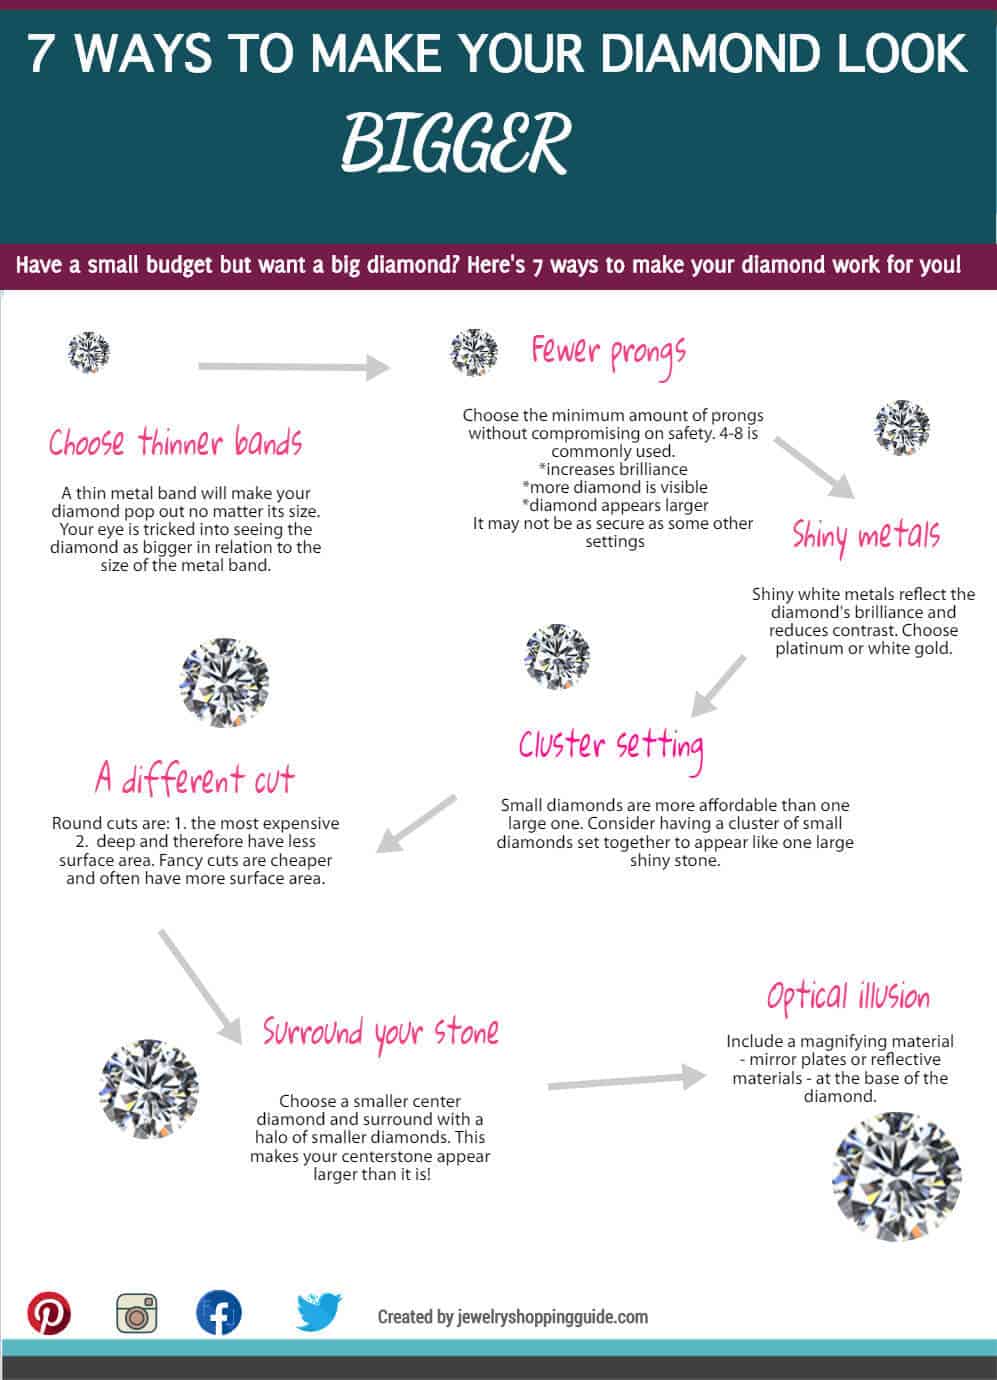 7 way to make your diamond appear larger infographic